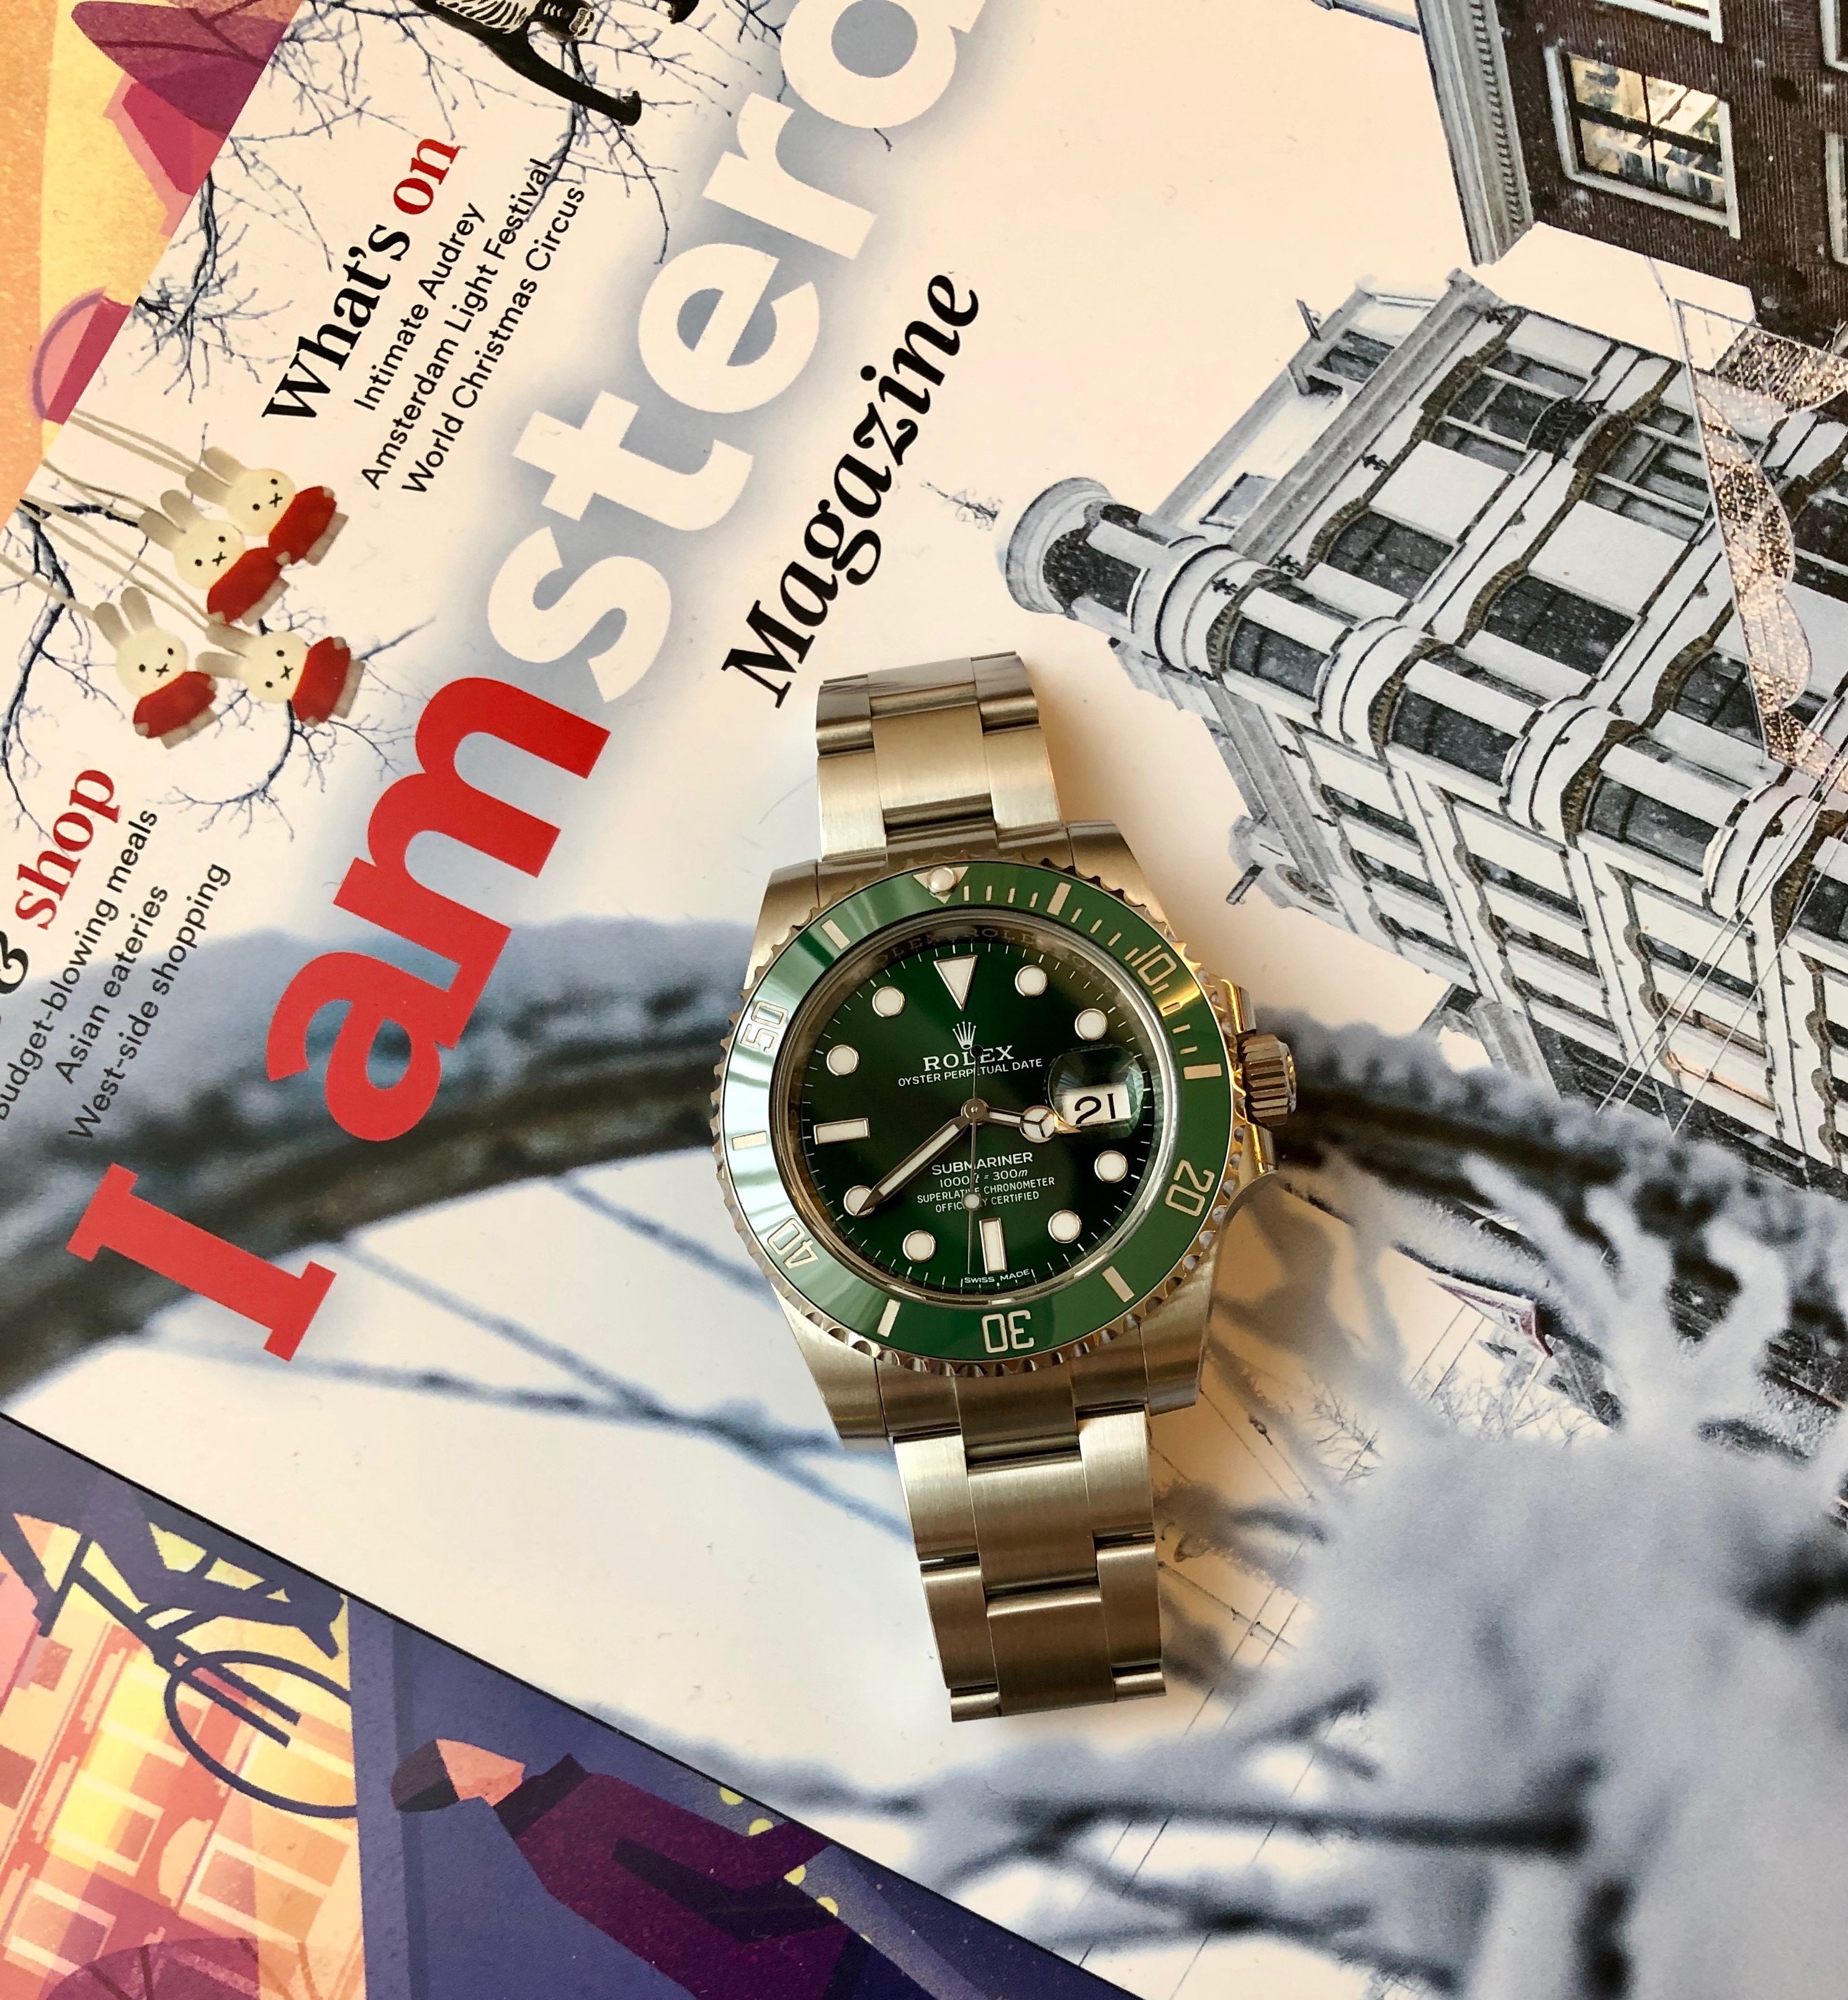 Getting high in Amsterdam with a Rolex Submariner ‘Hulk’